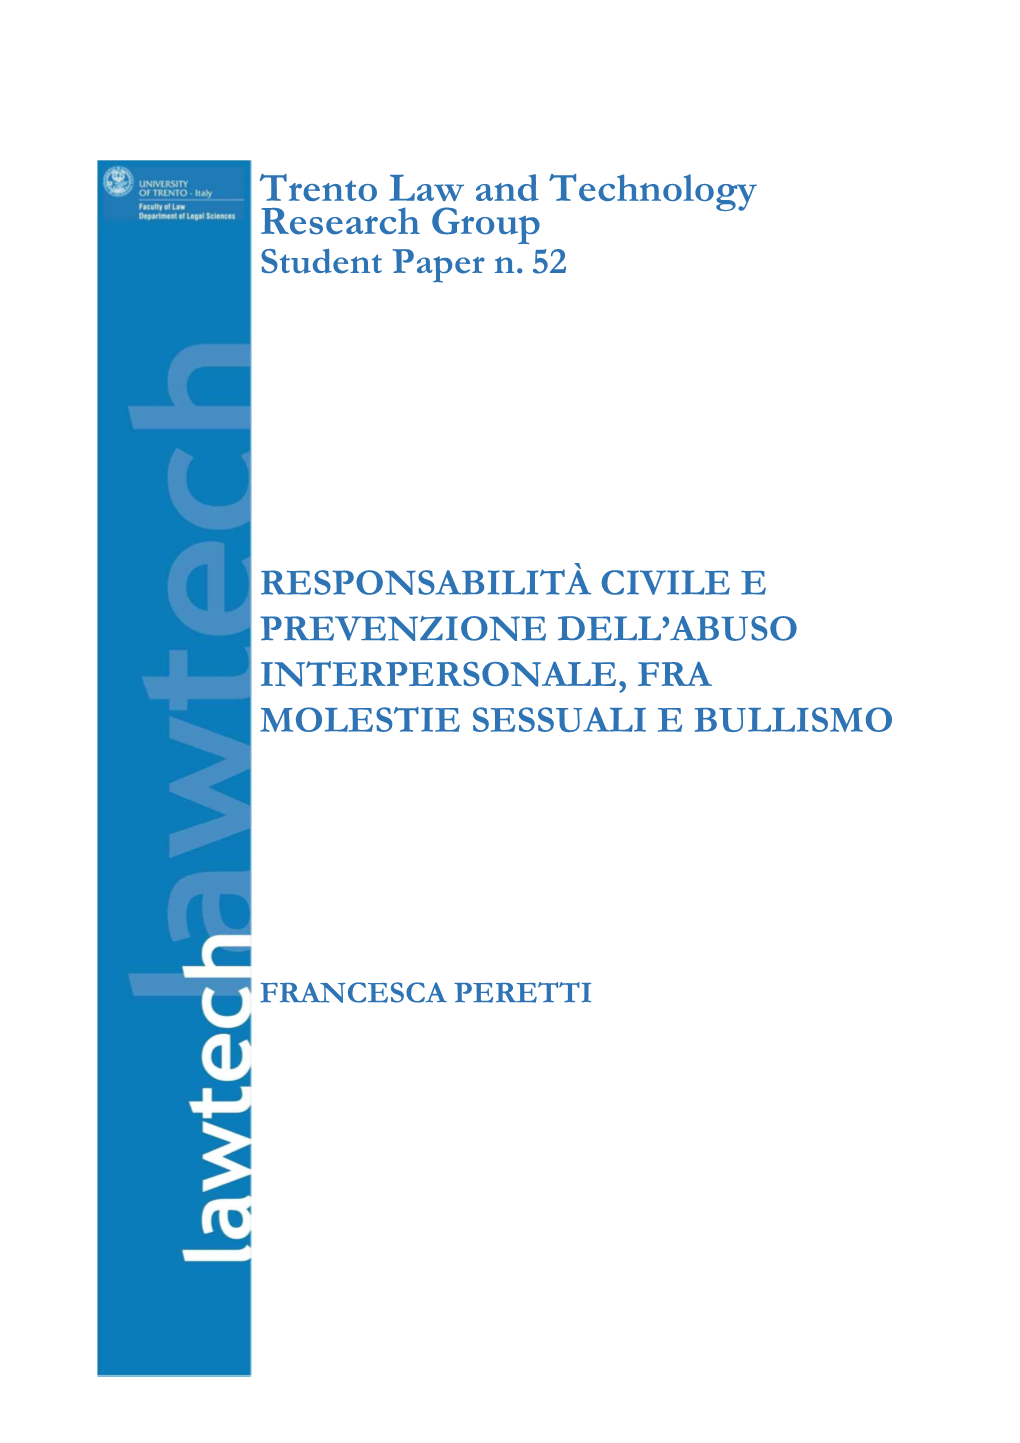 Trento Law and Technology Research Group Student Paper N